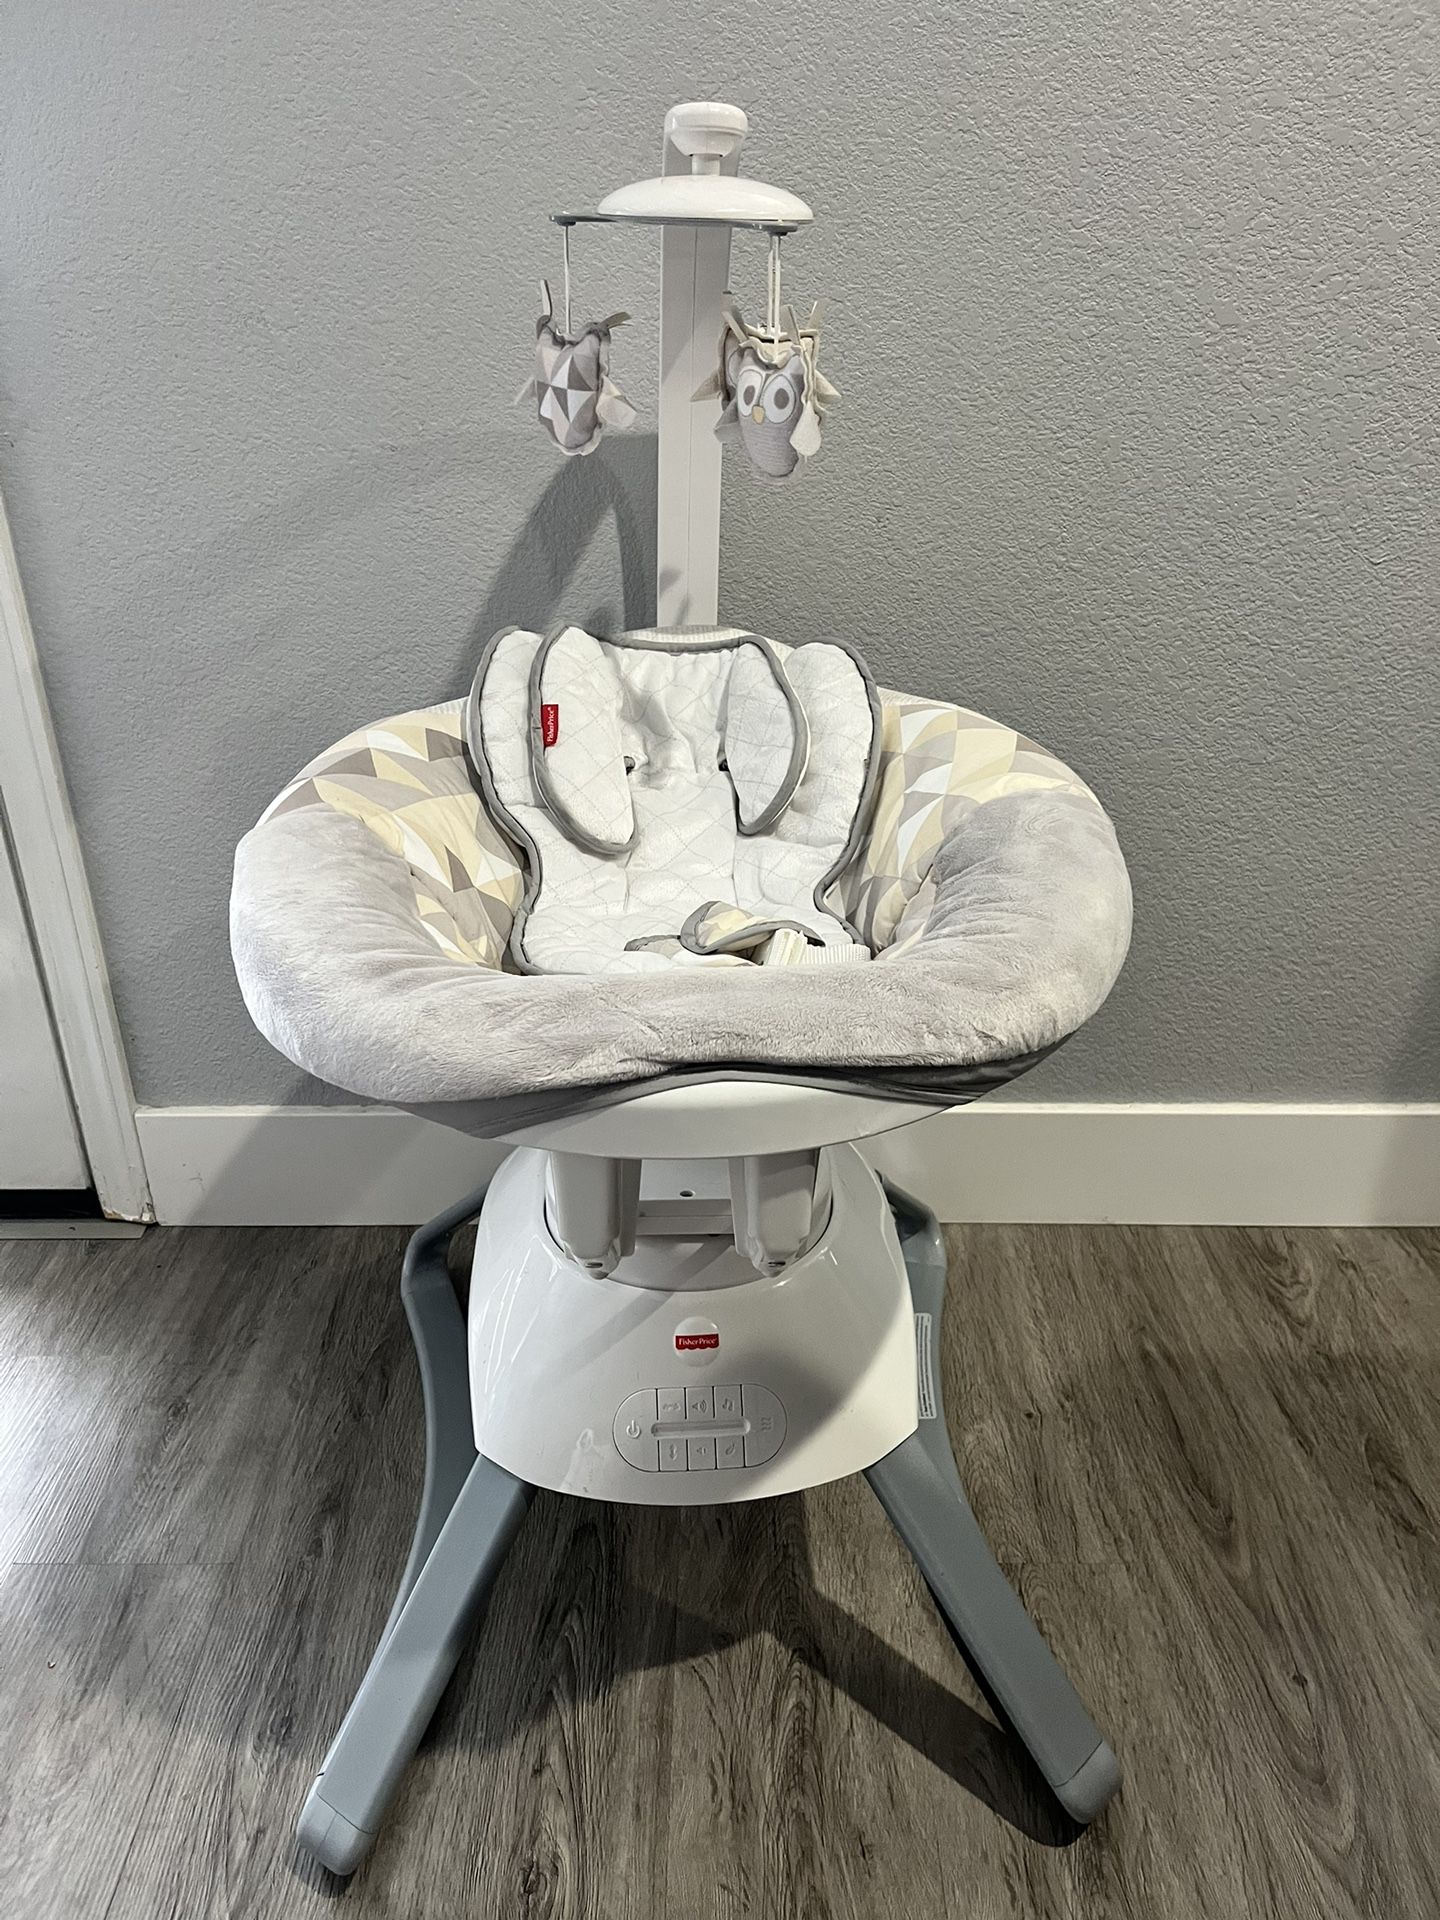 Fisher Price Electric Baby Chair